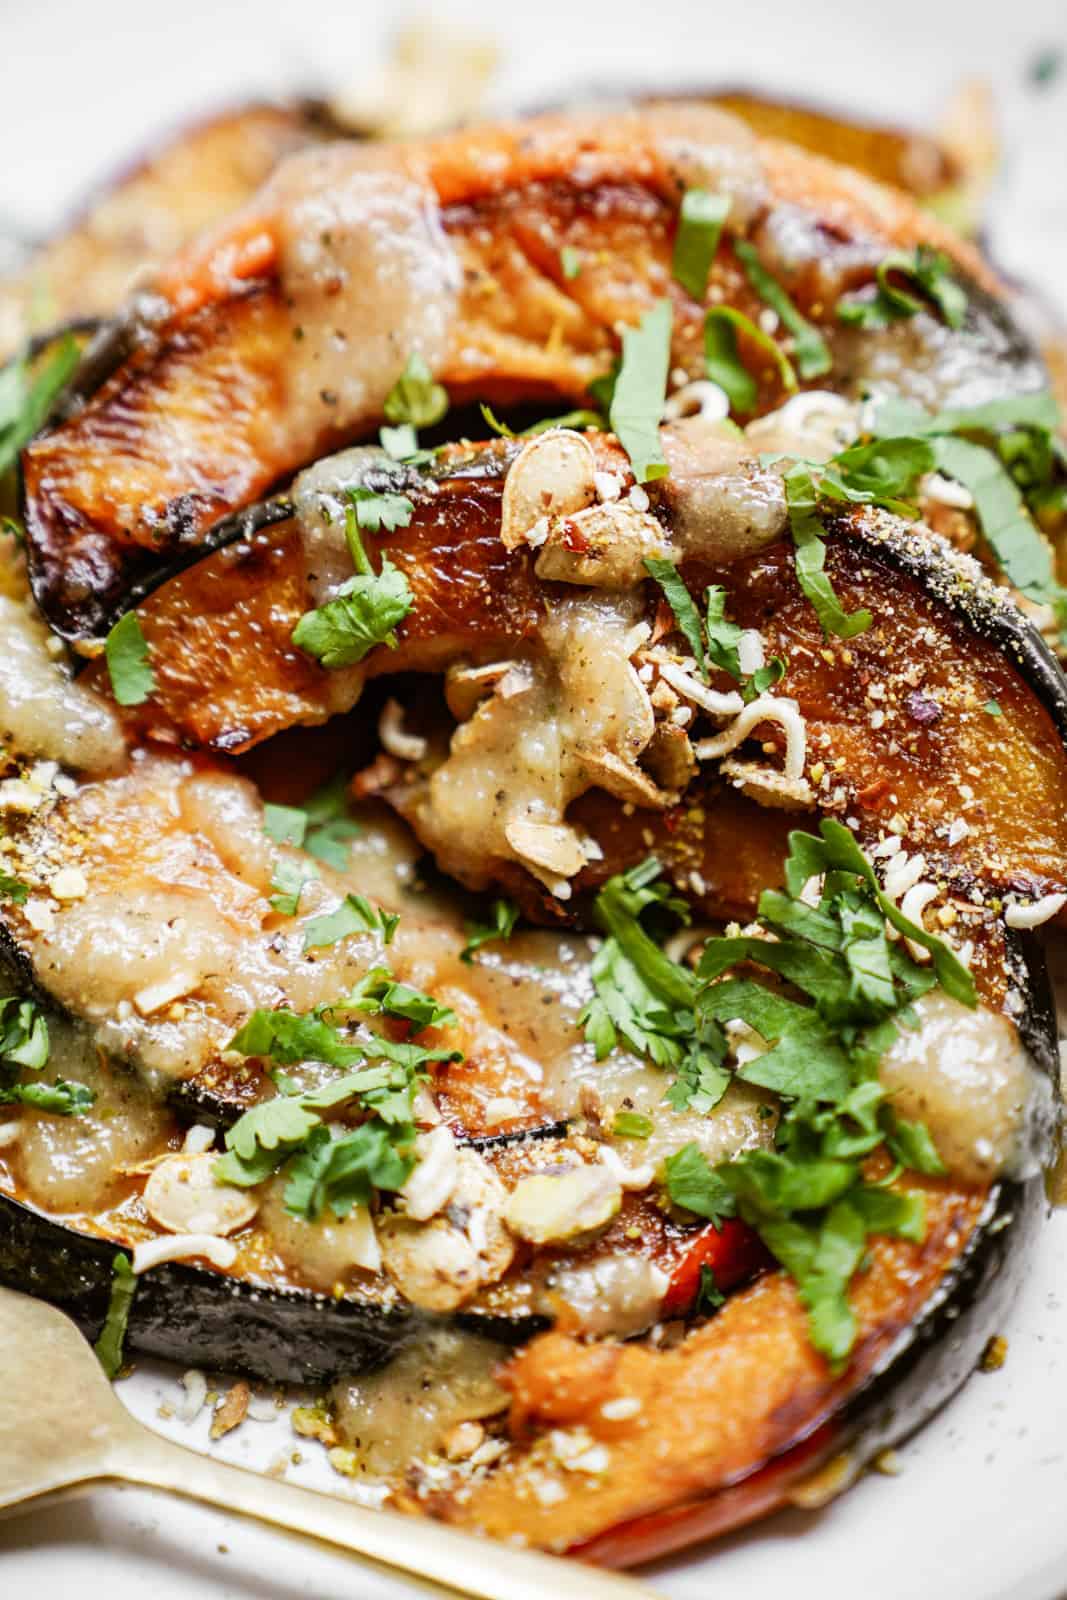 Close-up of roasted acorn squash recipe full of texture and sprinkled with parsley.